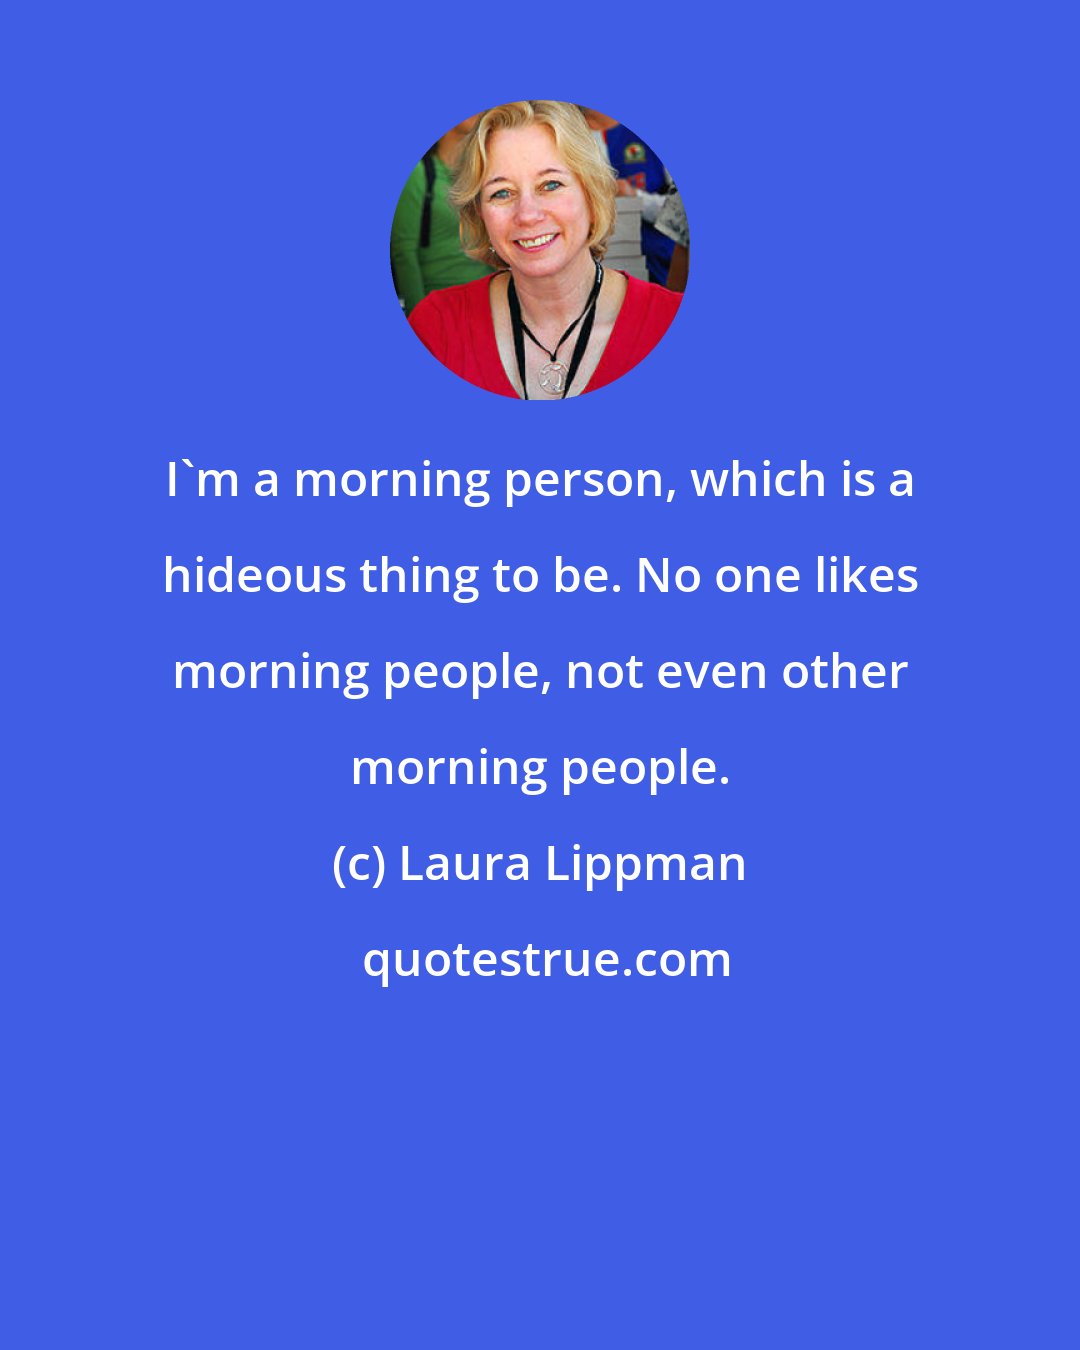 Laura Lippman: I'm a morning person, which is a hideous thing to be. No one likes morning people, not even other morning people.